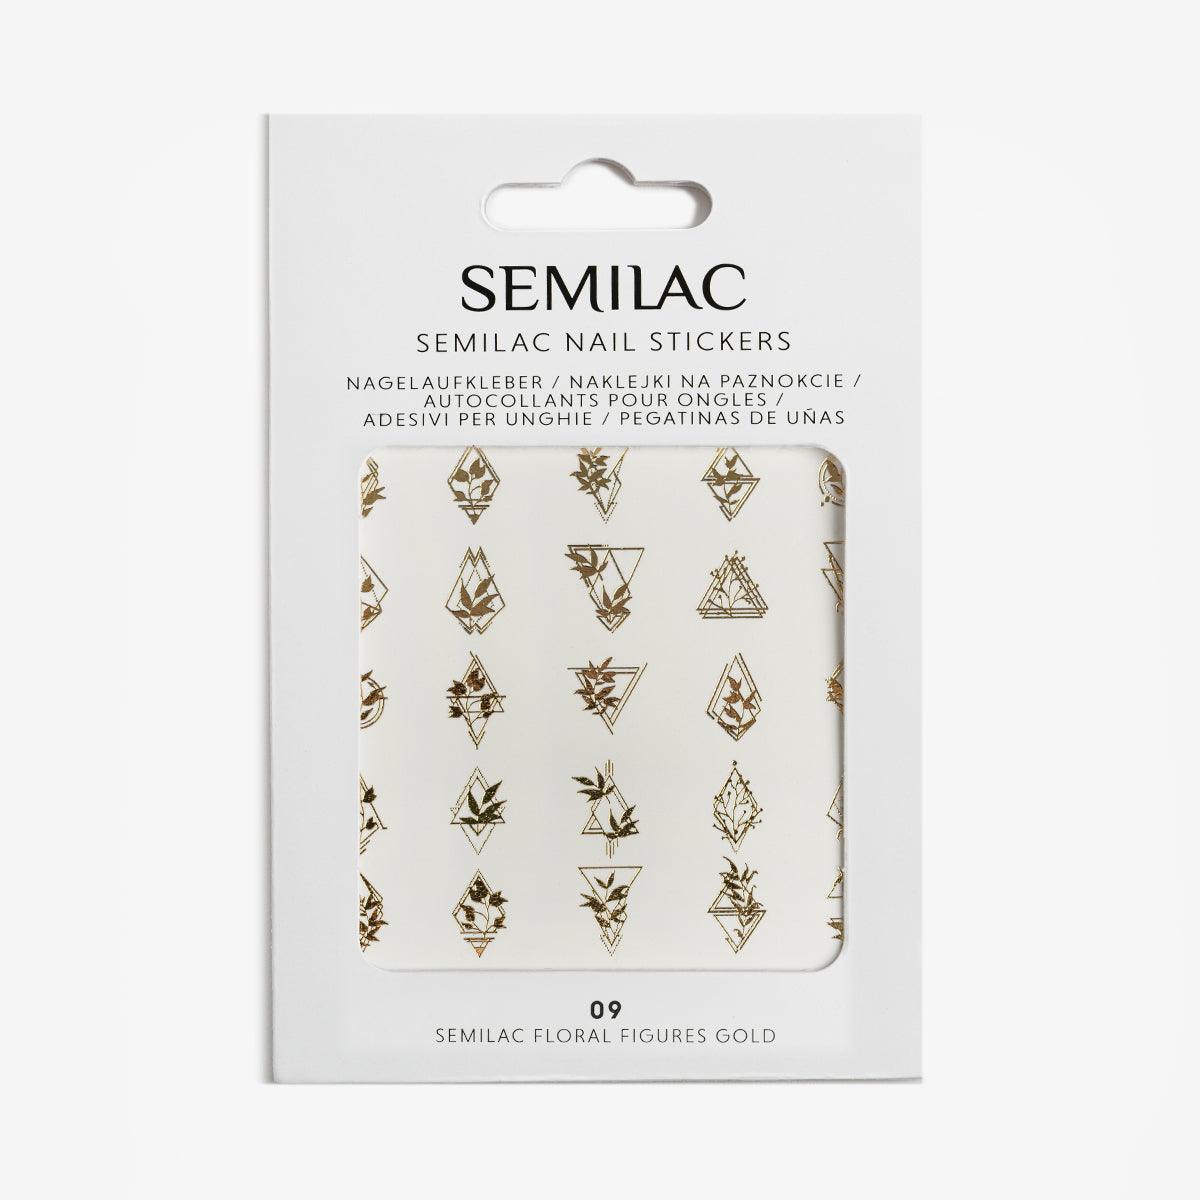 Semilac Floral Figures Gold 3D Nail Stickers 09 - Semilac UK